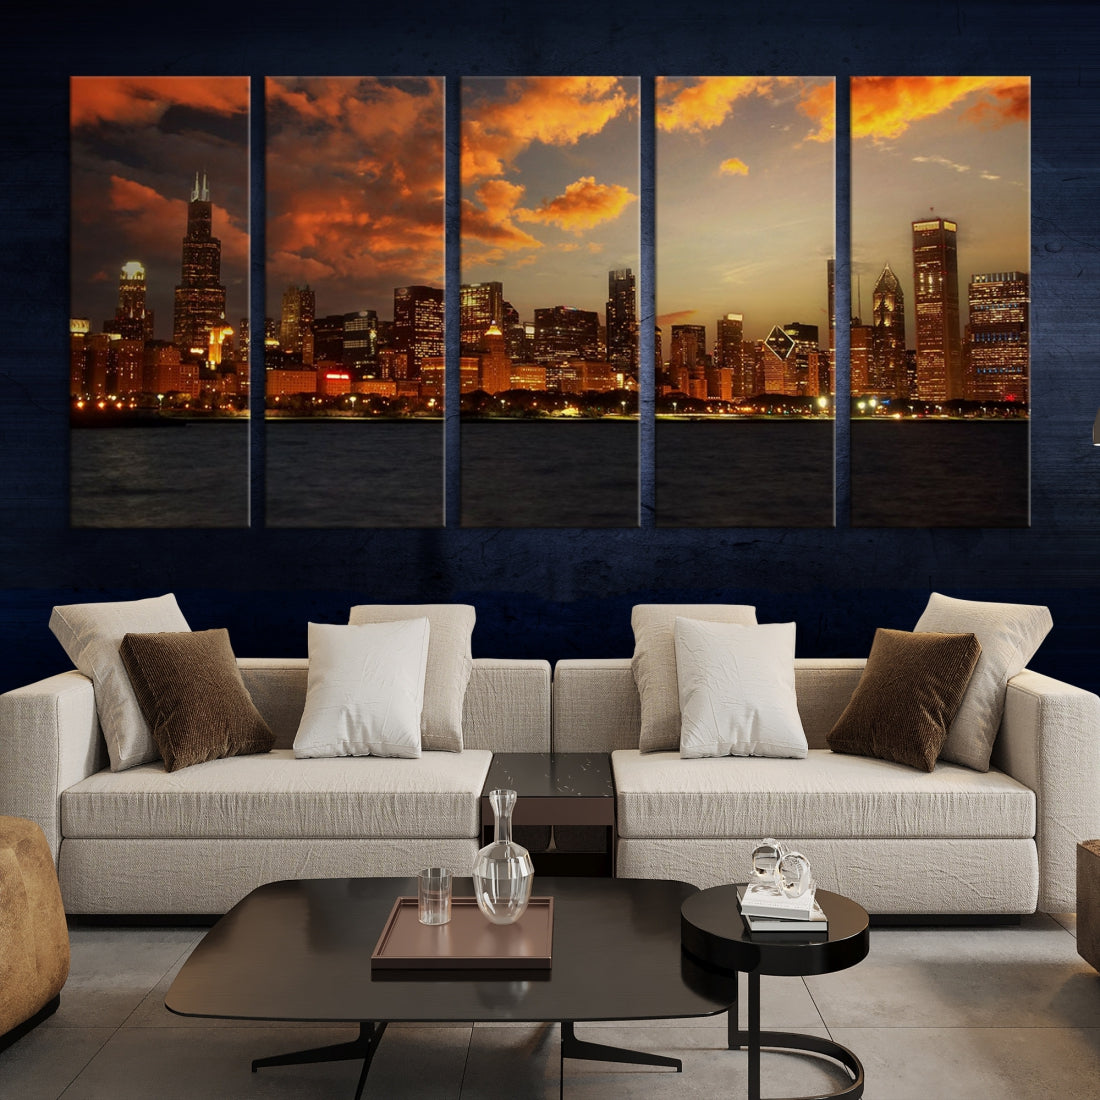 Chicago City Lights Sunset Orange Cloudy Skyline Cityscape View Large Wall Art Canvas Print